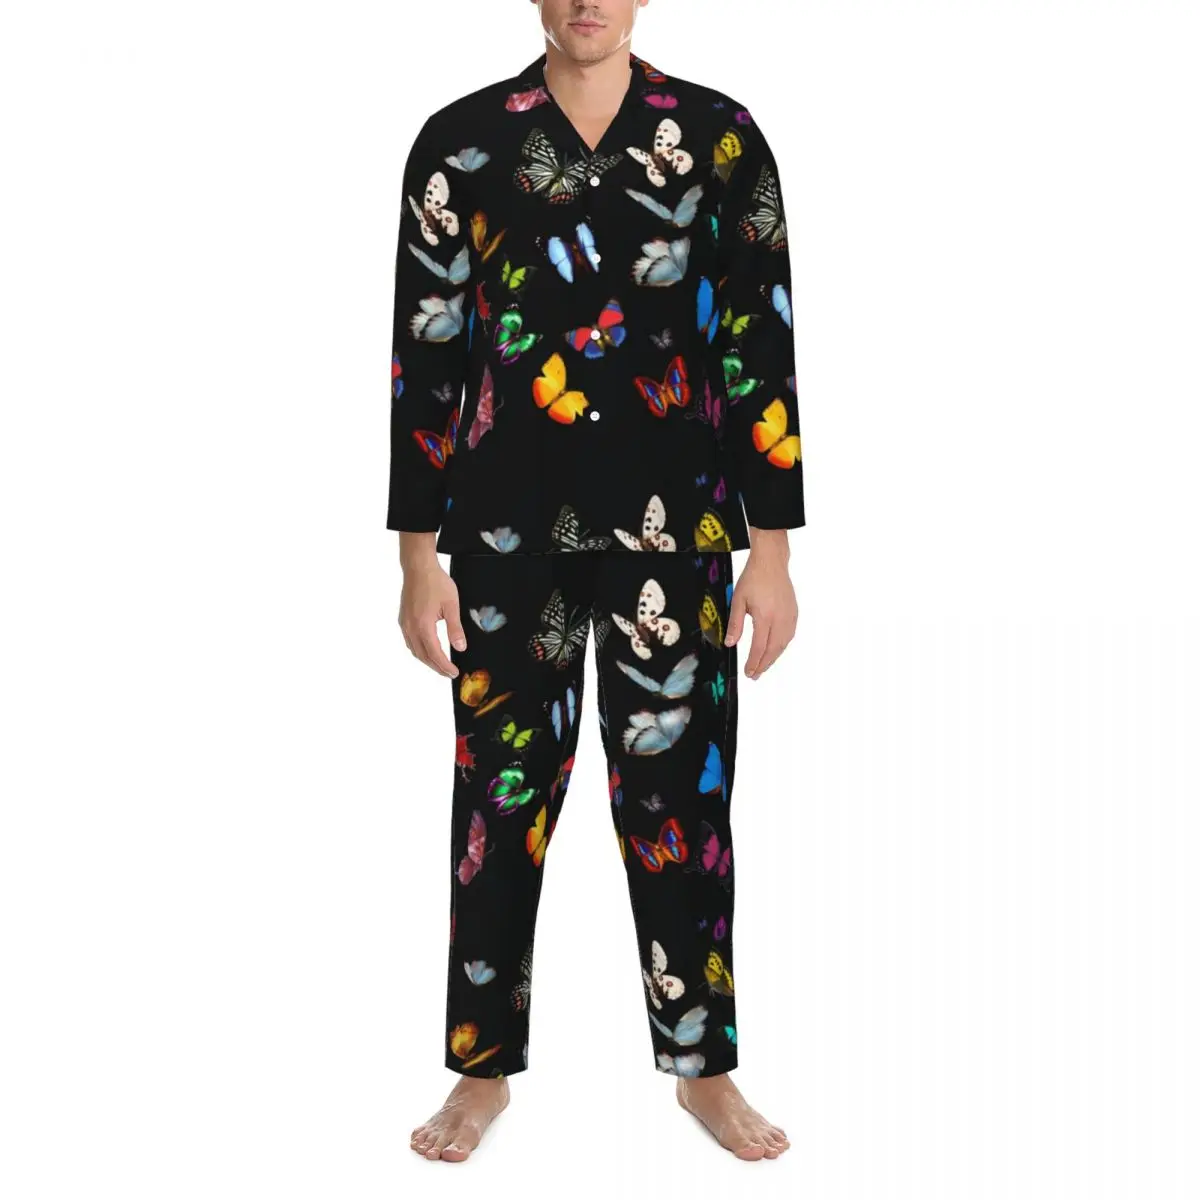 

Colorfull Butterfly Pajama Set Lots of Pretty Butterflies Insect Soft Sleepwear Male Long Sleeve Vintage Home 2 Pieces Nightwear